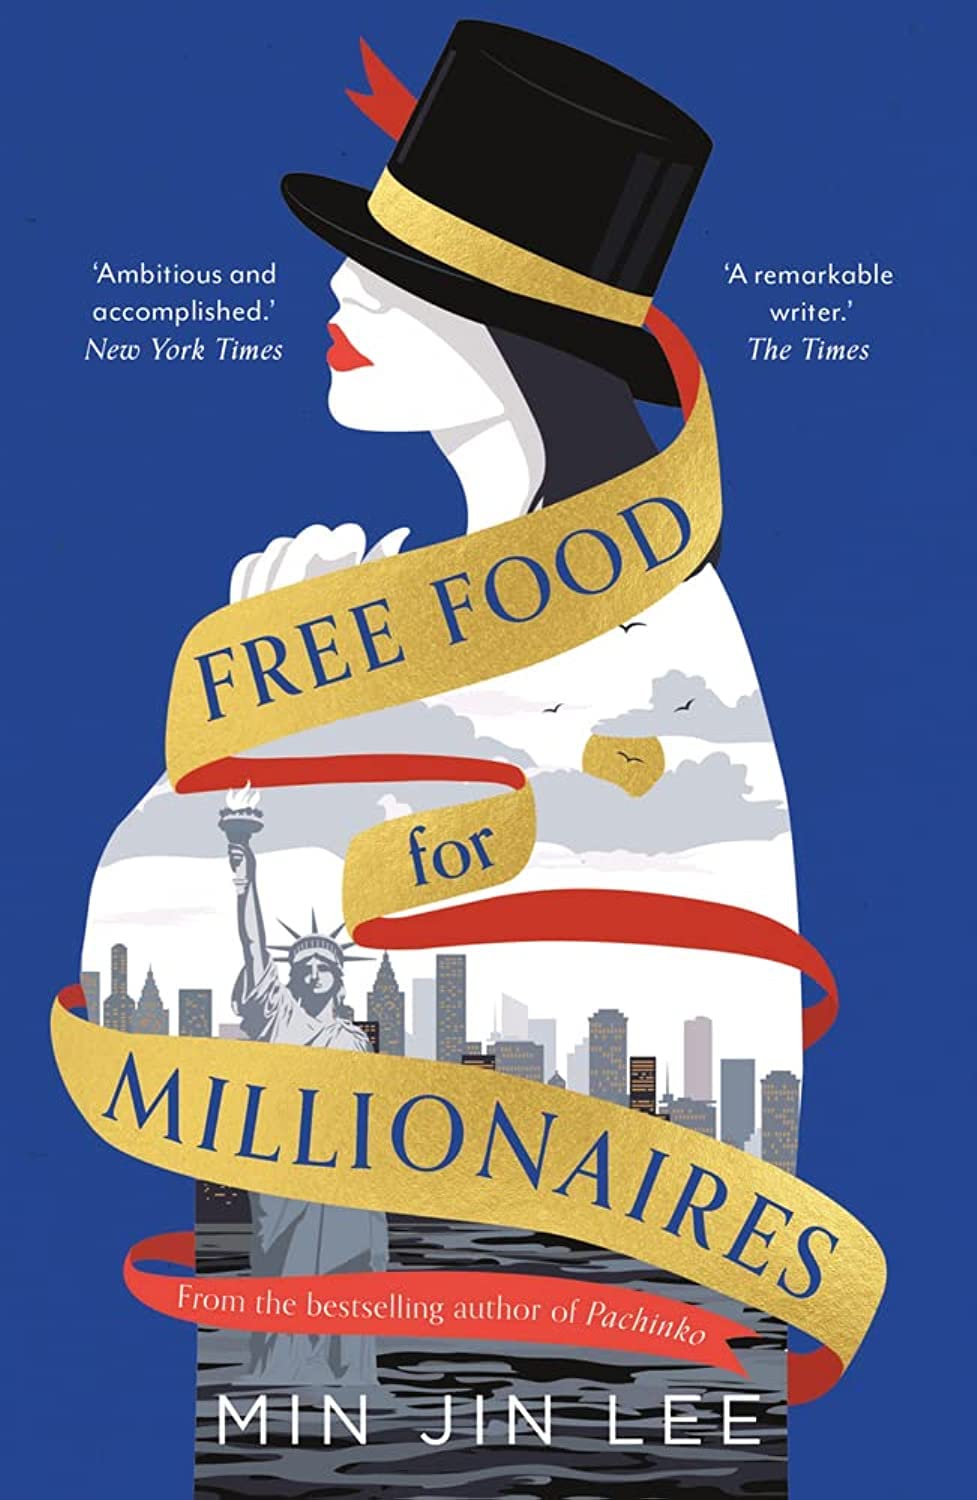 Free Food for Millionaires (Paperback)